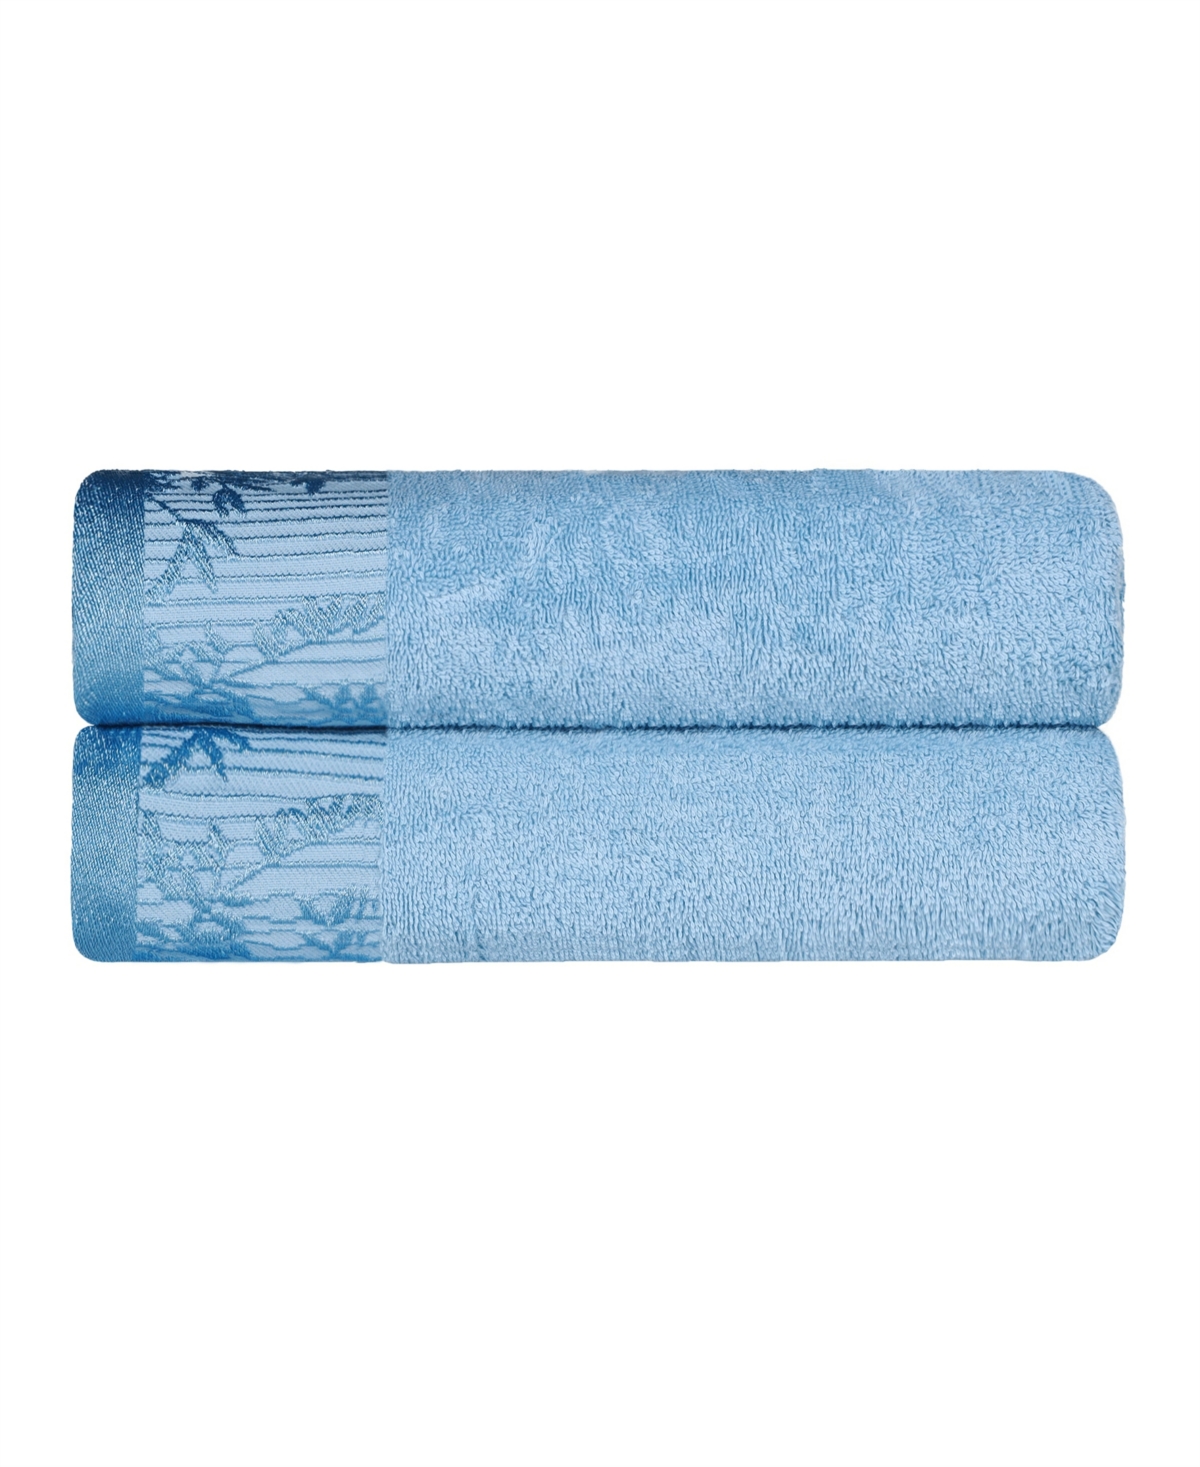 Superior Wisteria Floral Embroidered Jacquard Border Cotton Bath Towel Set, 2 Pieces In Waterfall